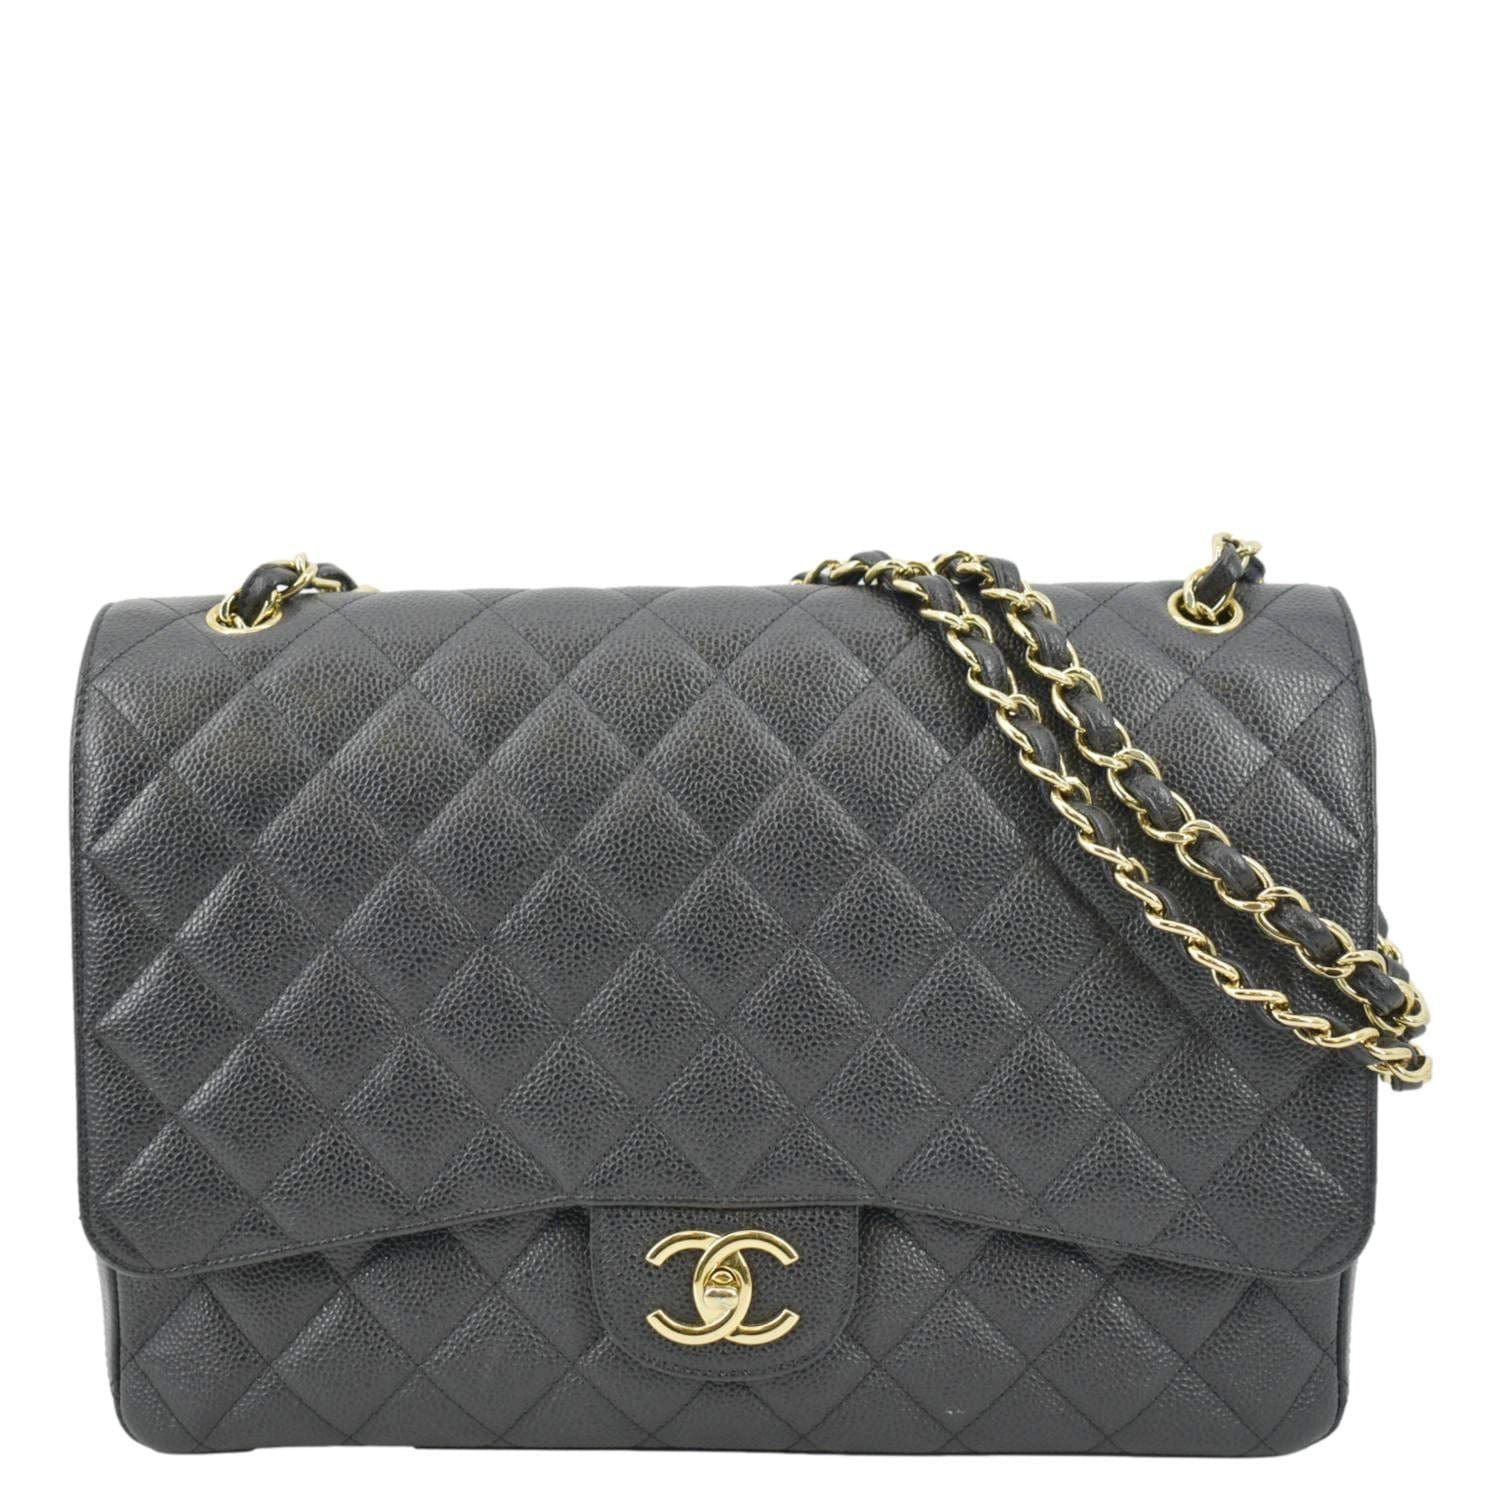 Chanel Classic Jumbo Double Flap Quilted Caviar Leather Shoulder Bag Black